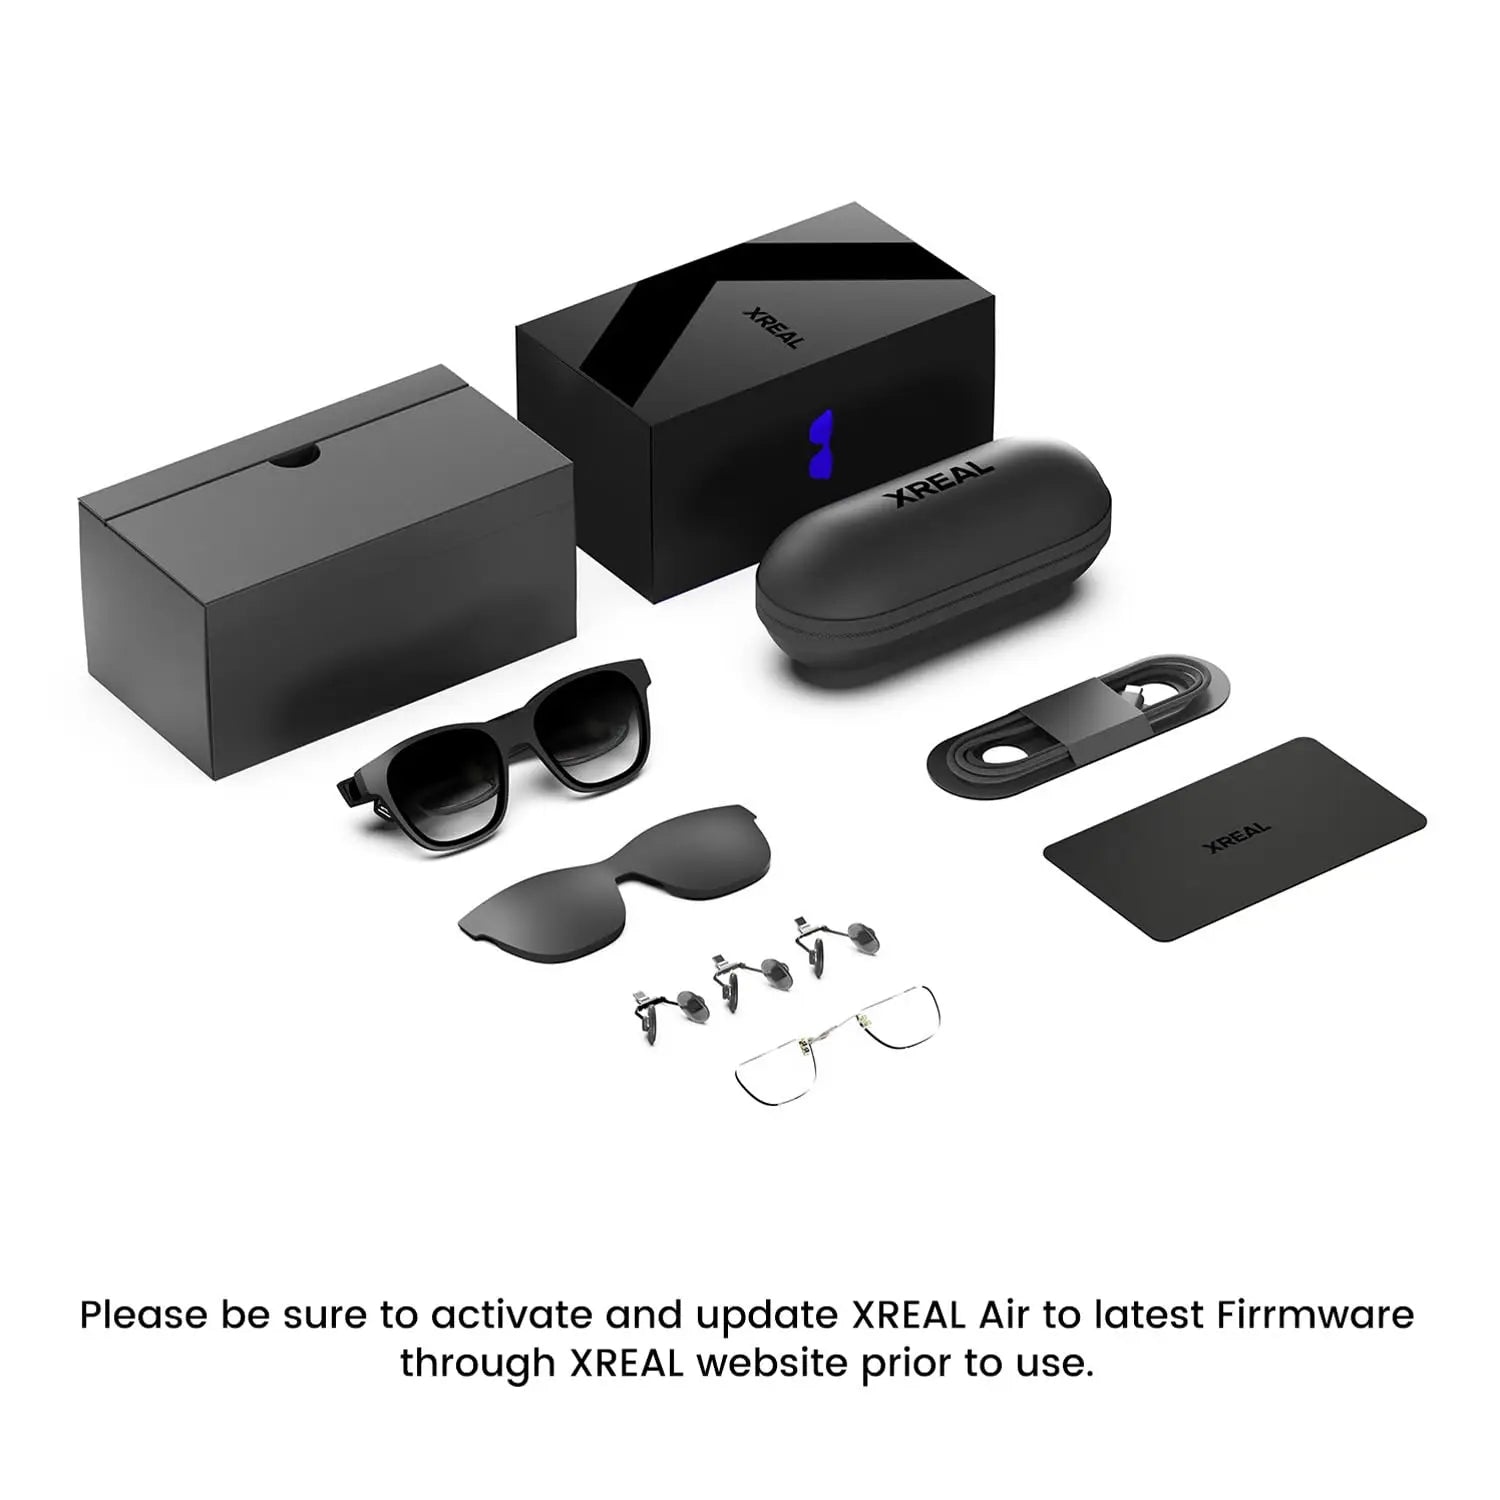 XREAL Air Nreal Air Smart AR Glasses: Immersive 130-inch 1080p Display, Portable Mobile AR Cinema Experience